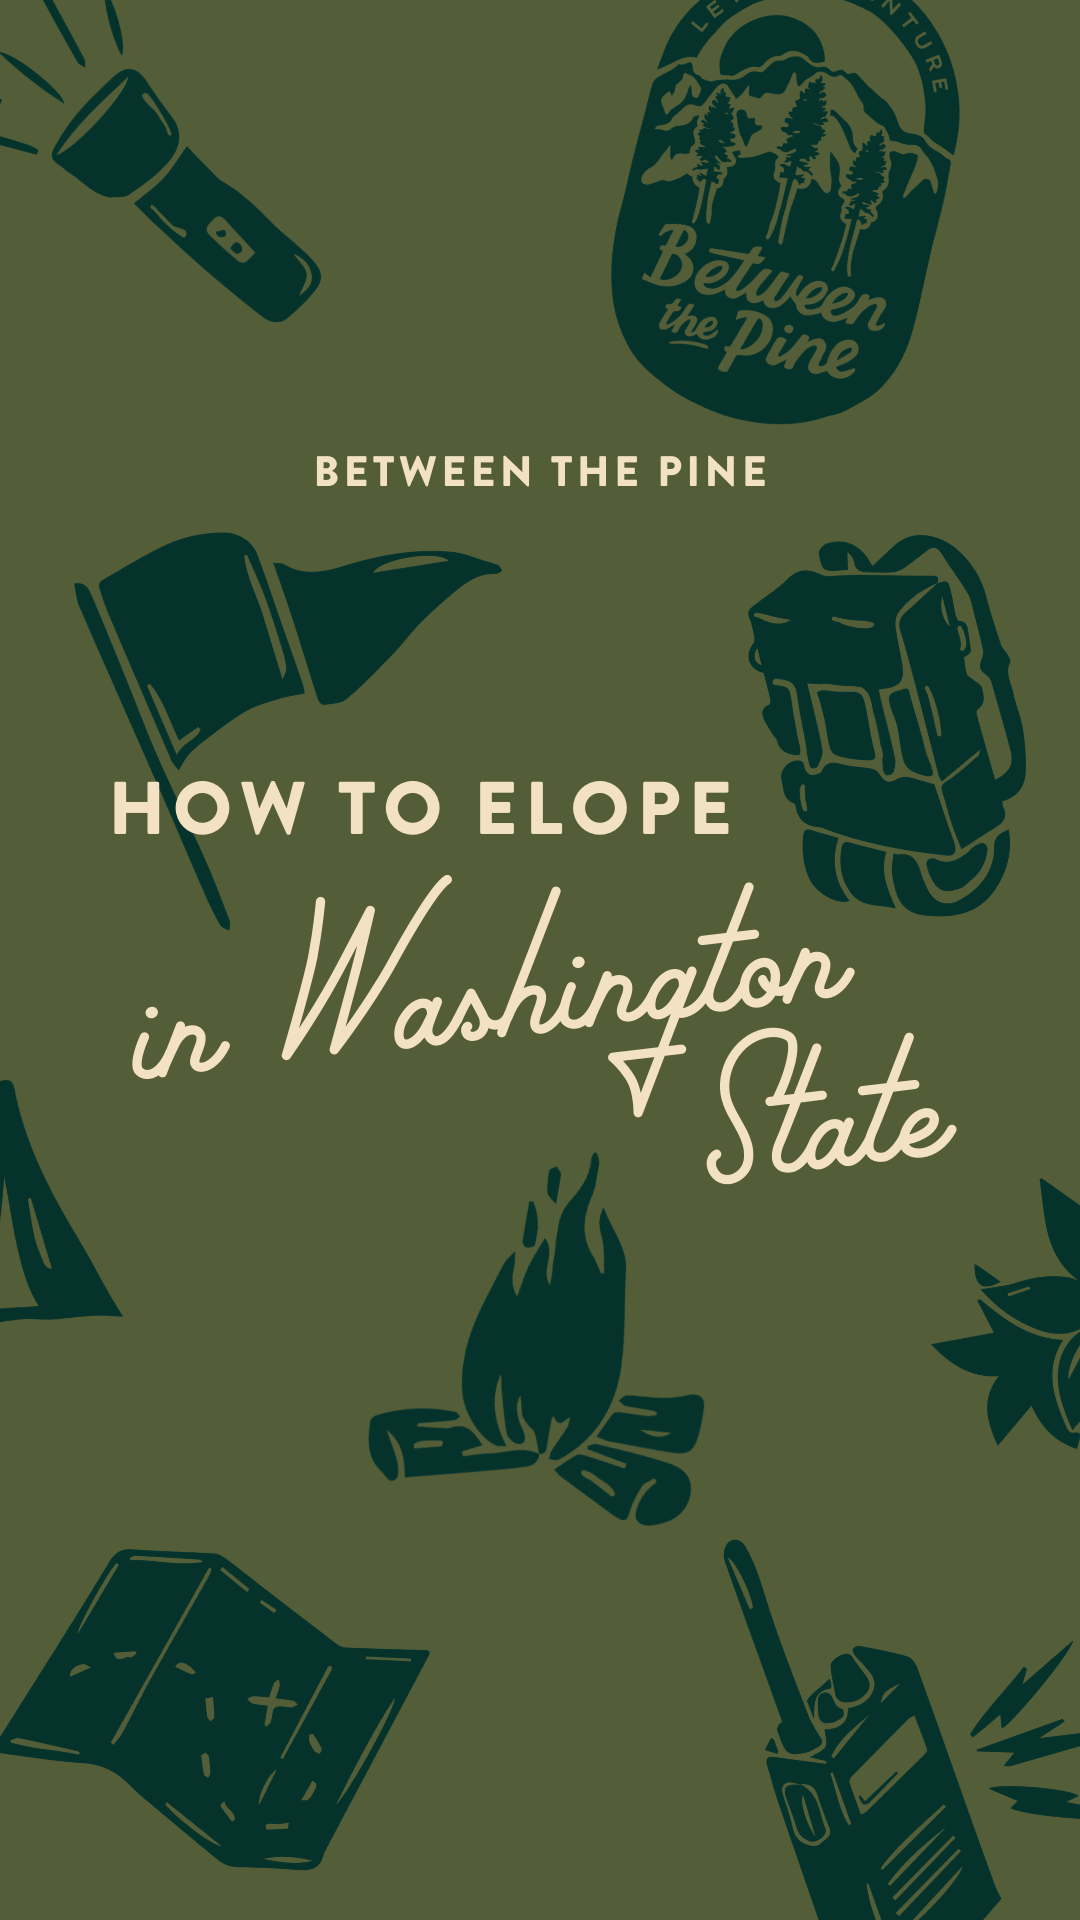 How to elope in washington state.png